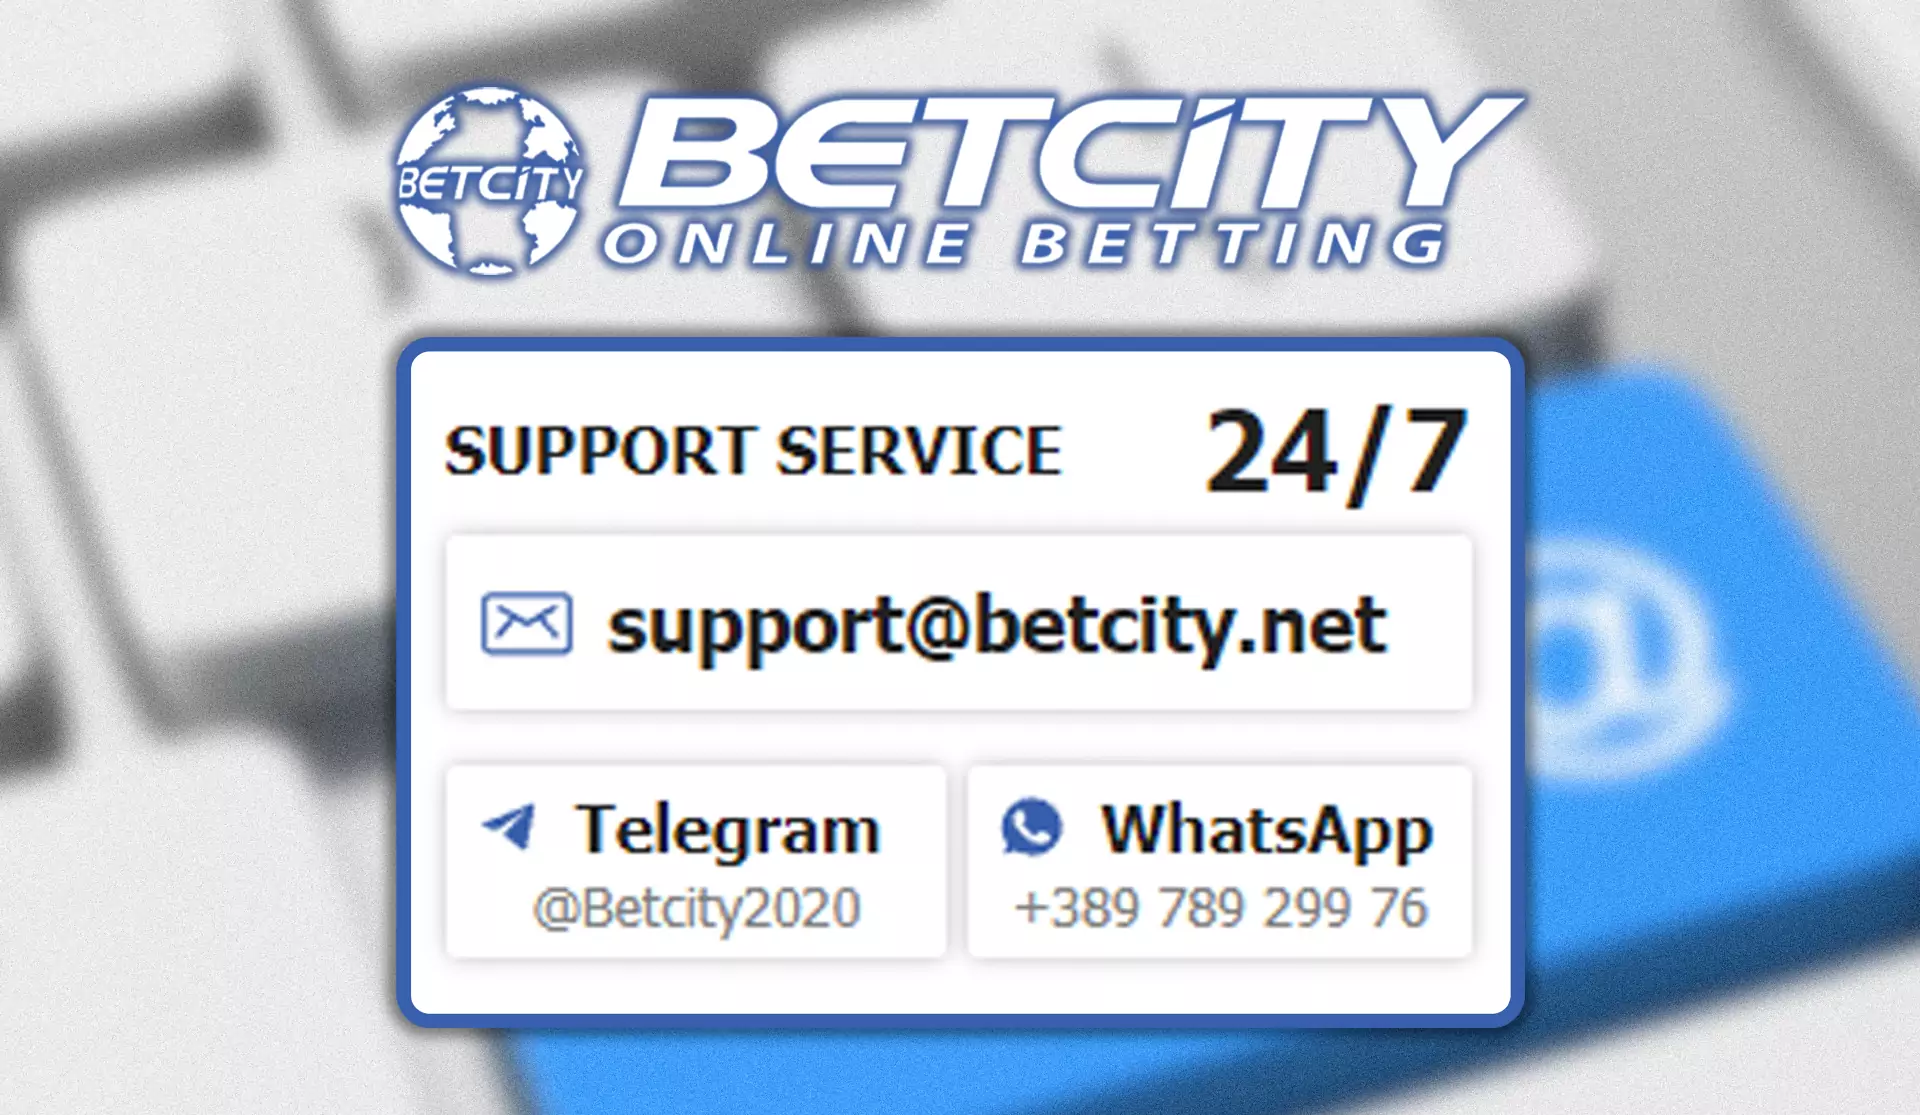 The support service of Betcity works 24/7, so feel free to open a chat anytime.